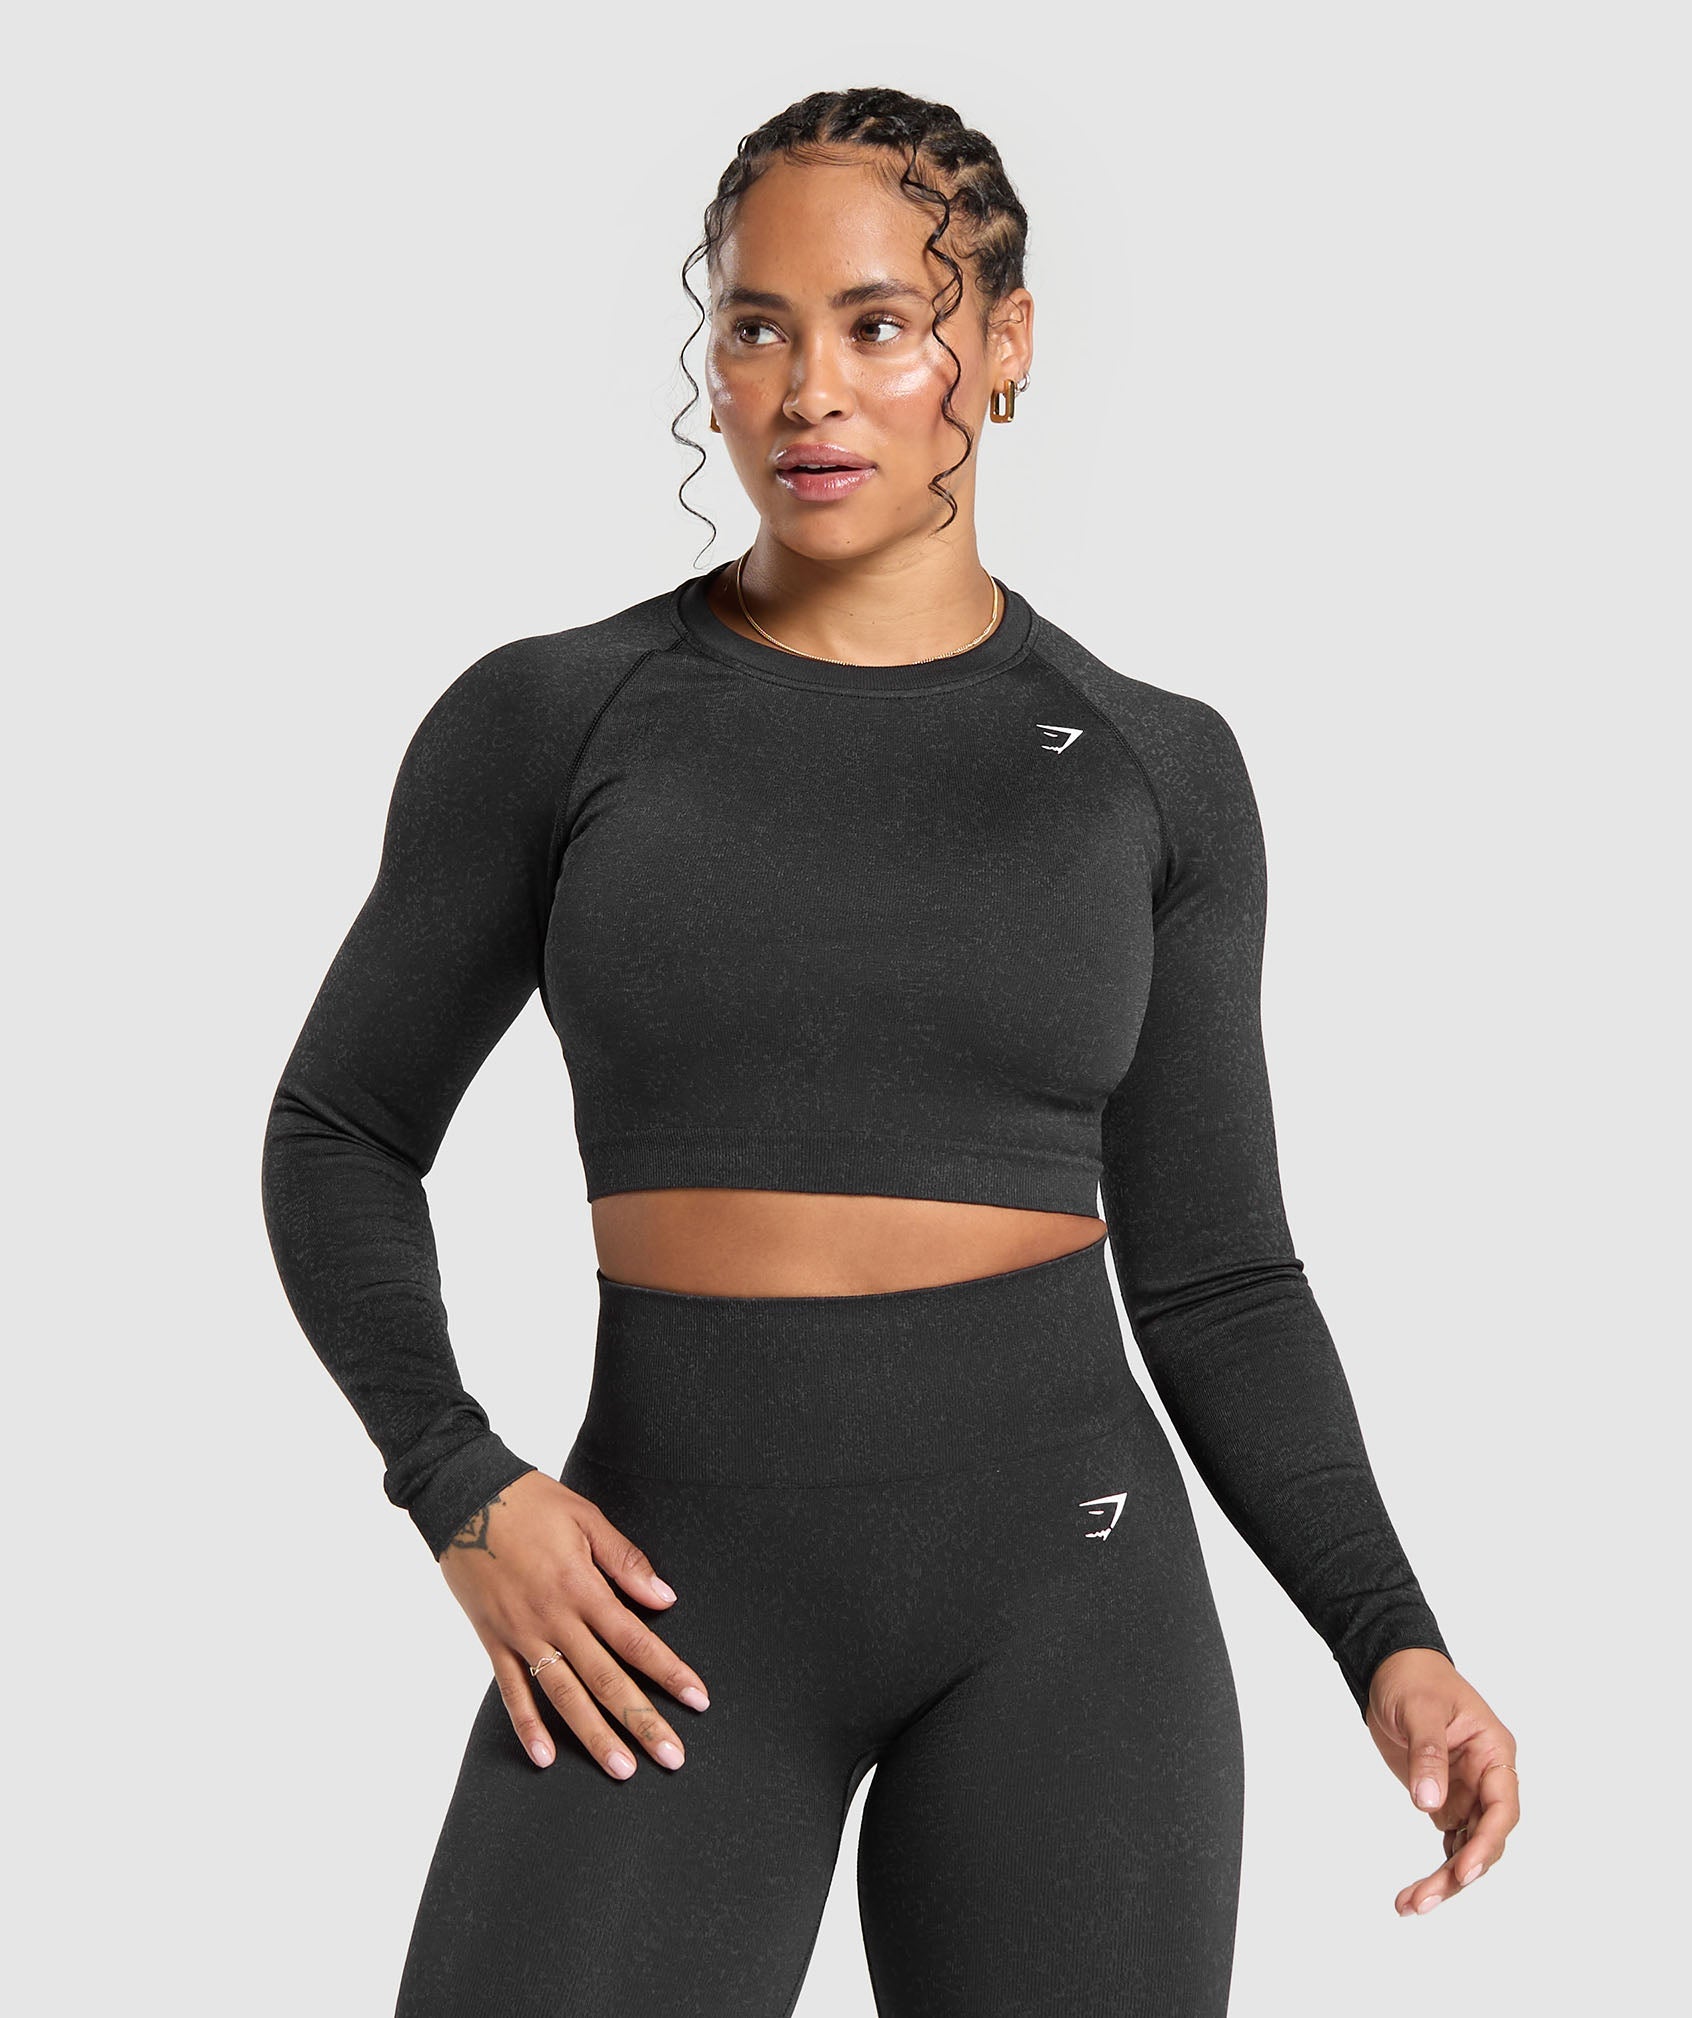 Adapt Fleck Seamless Long Sleeve Crop Top in {{variantColor} is out of stock